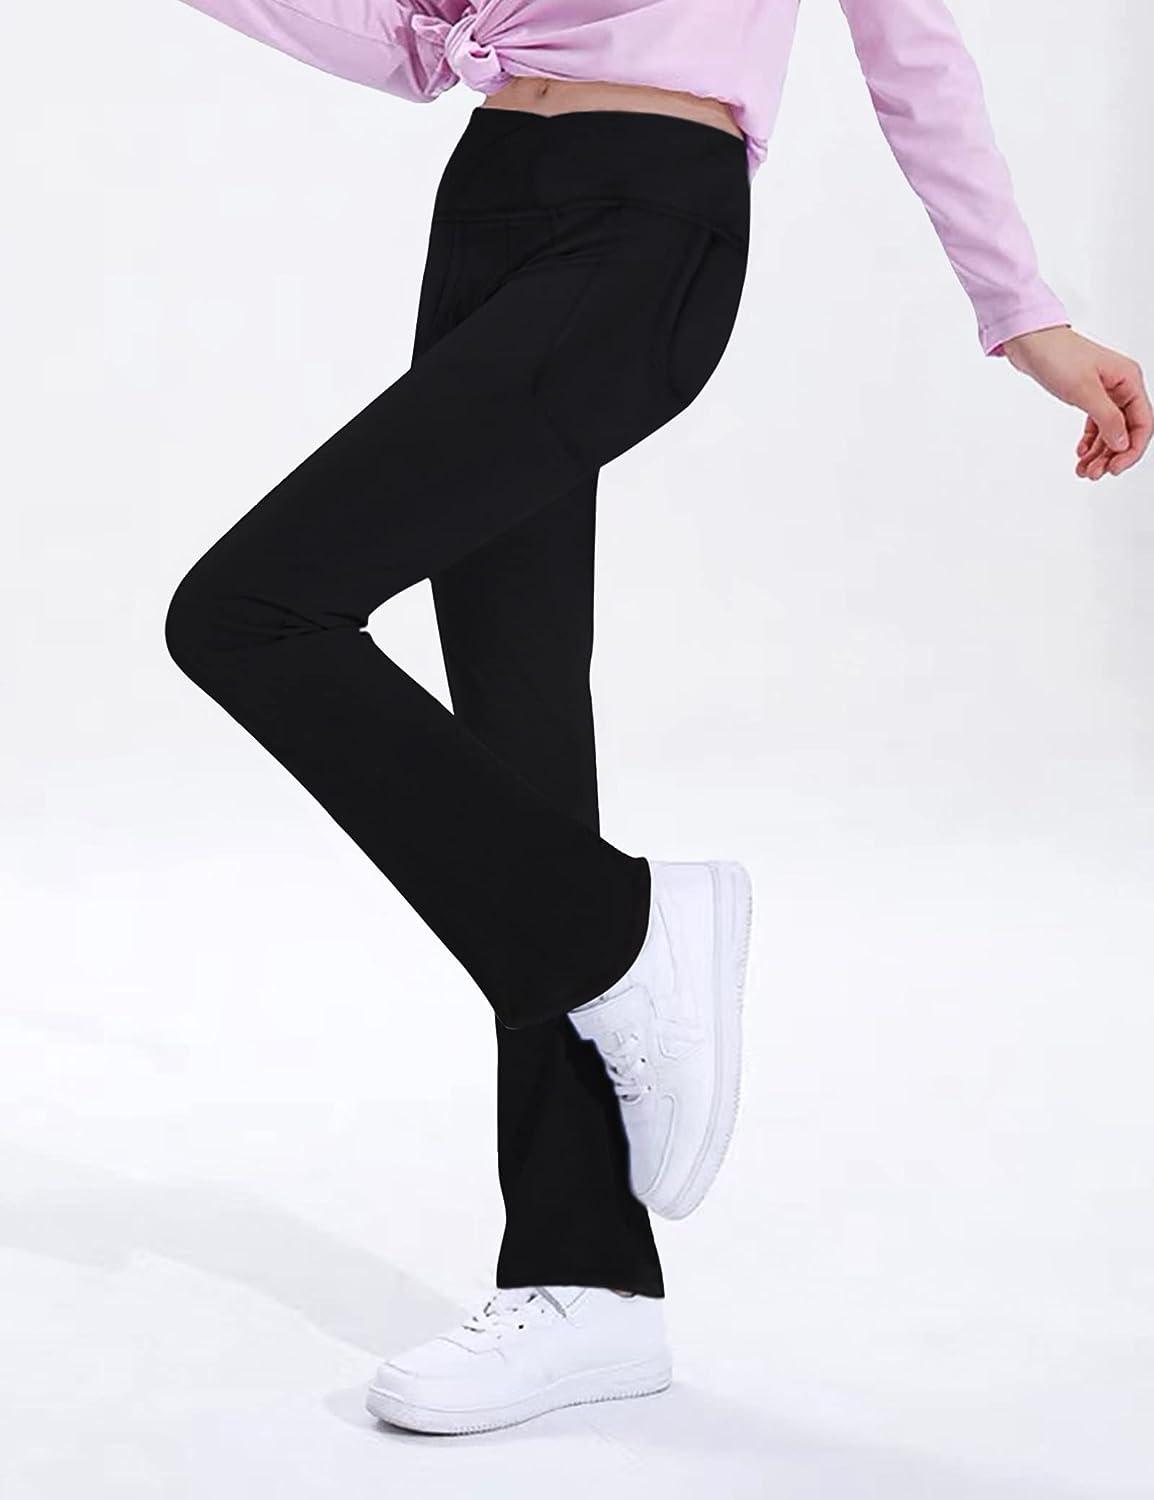  Girls Bootcut Yoga Pants with Pockets - V Cross High Waist  Flare Workout Dance Leggings for Kids : Clothing, Shoes & Jewelry